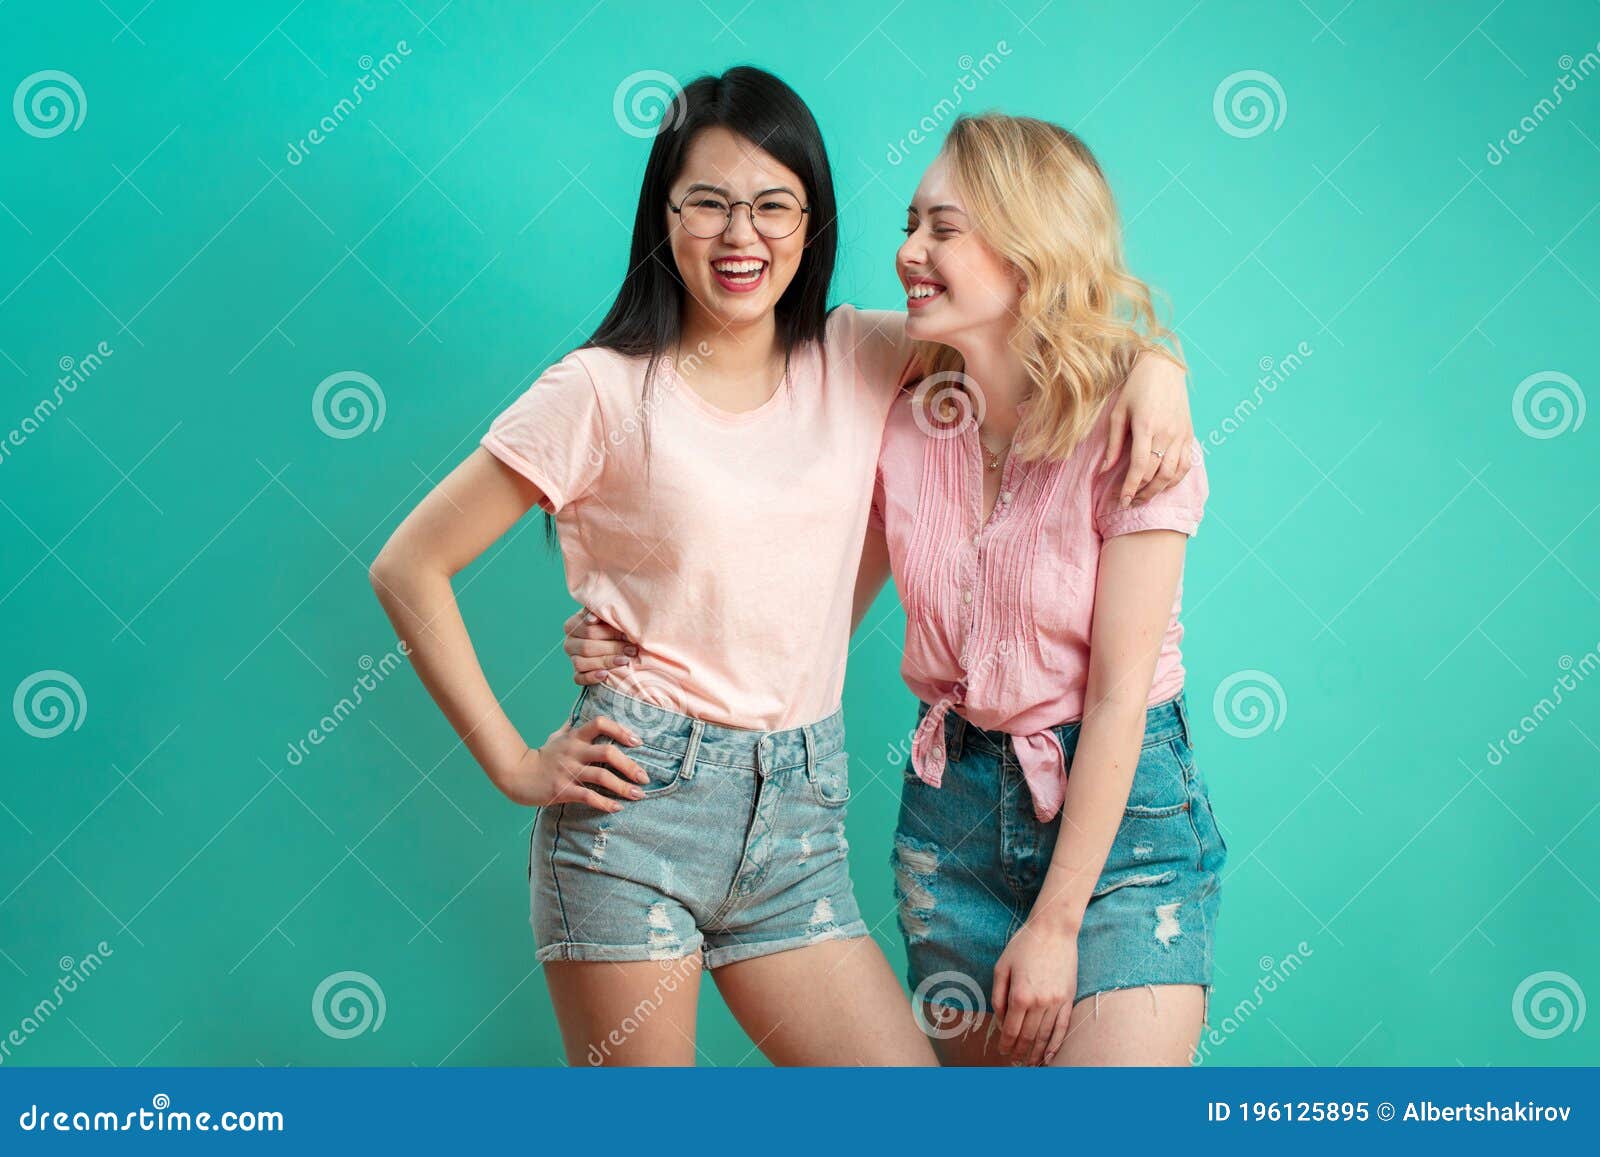 Positive multiracial young fashionable women in summer outfits